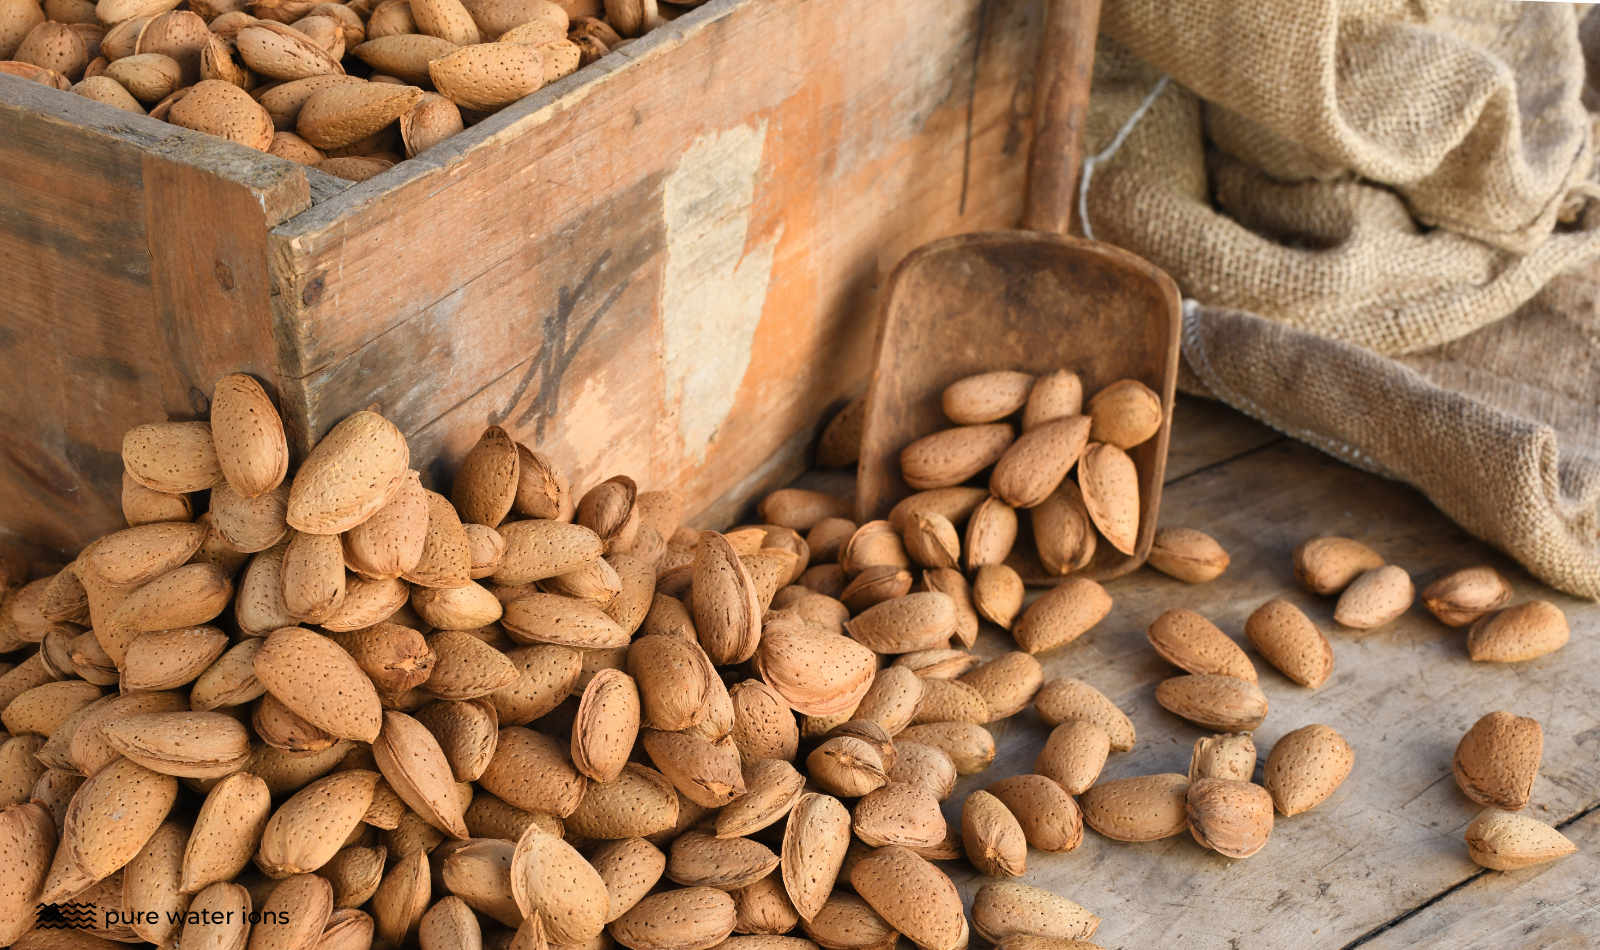 almond nuts in a box after harvest